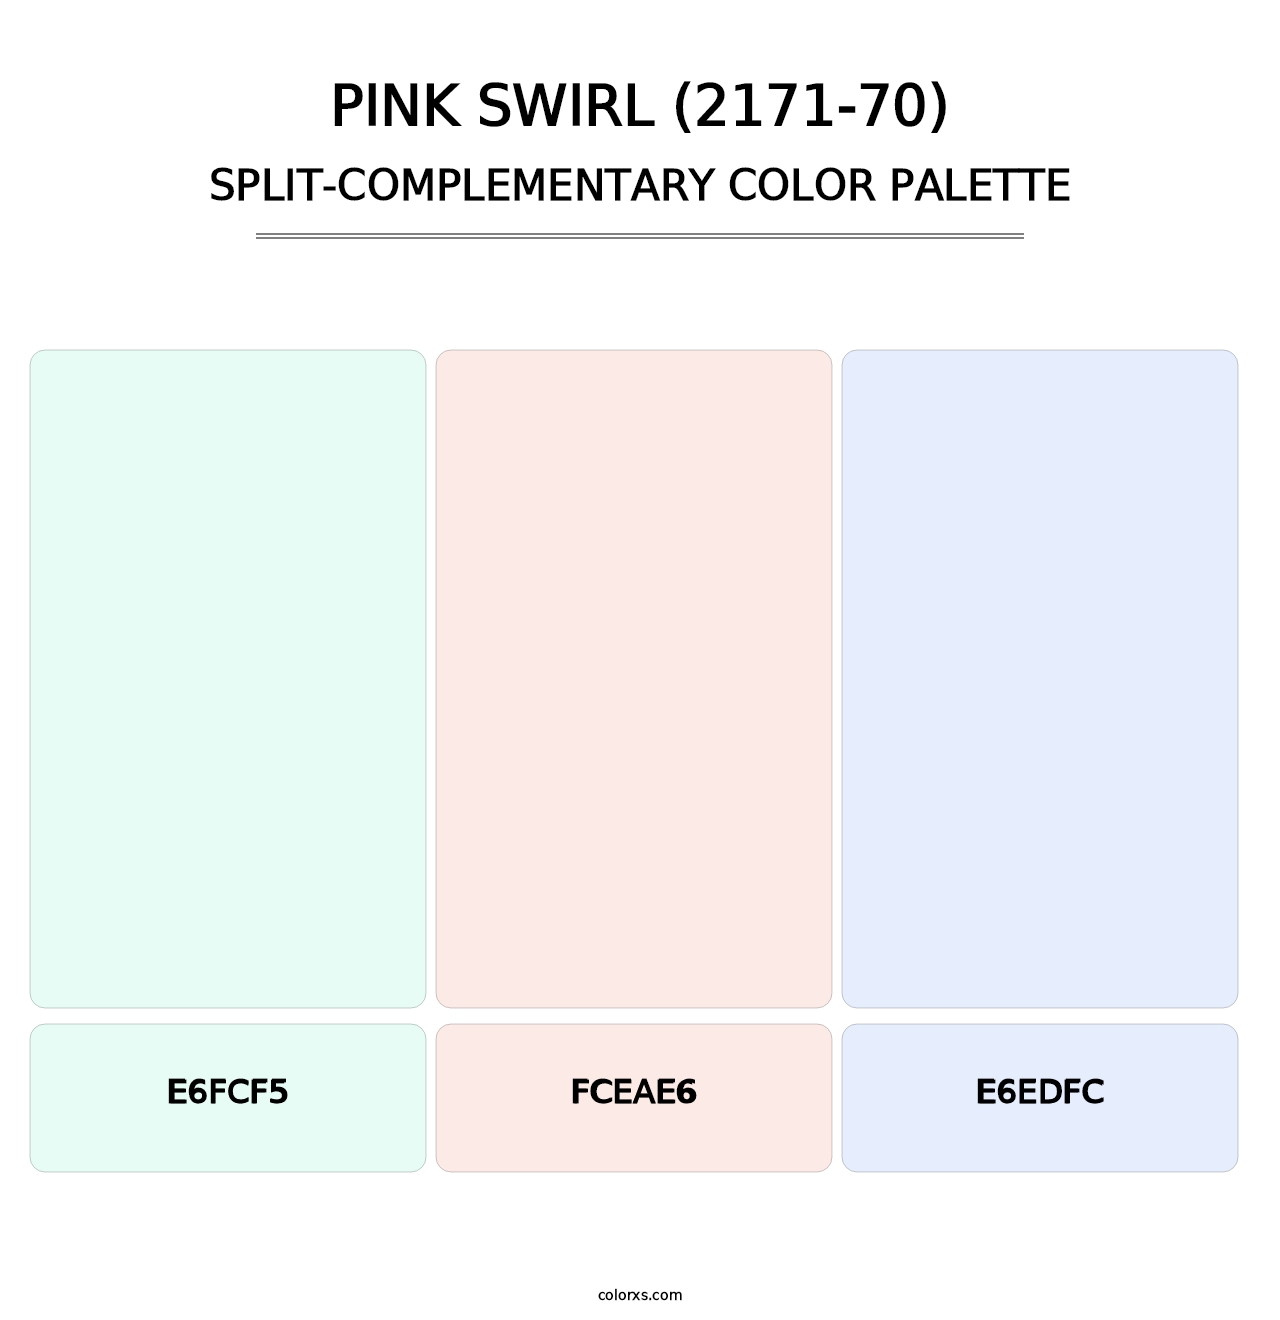 Pink Swirl (2171-70) - Split-Complementary Color Palette